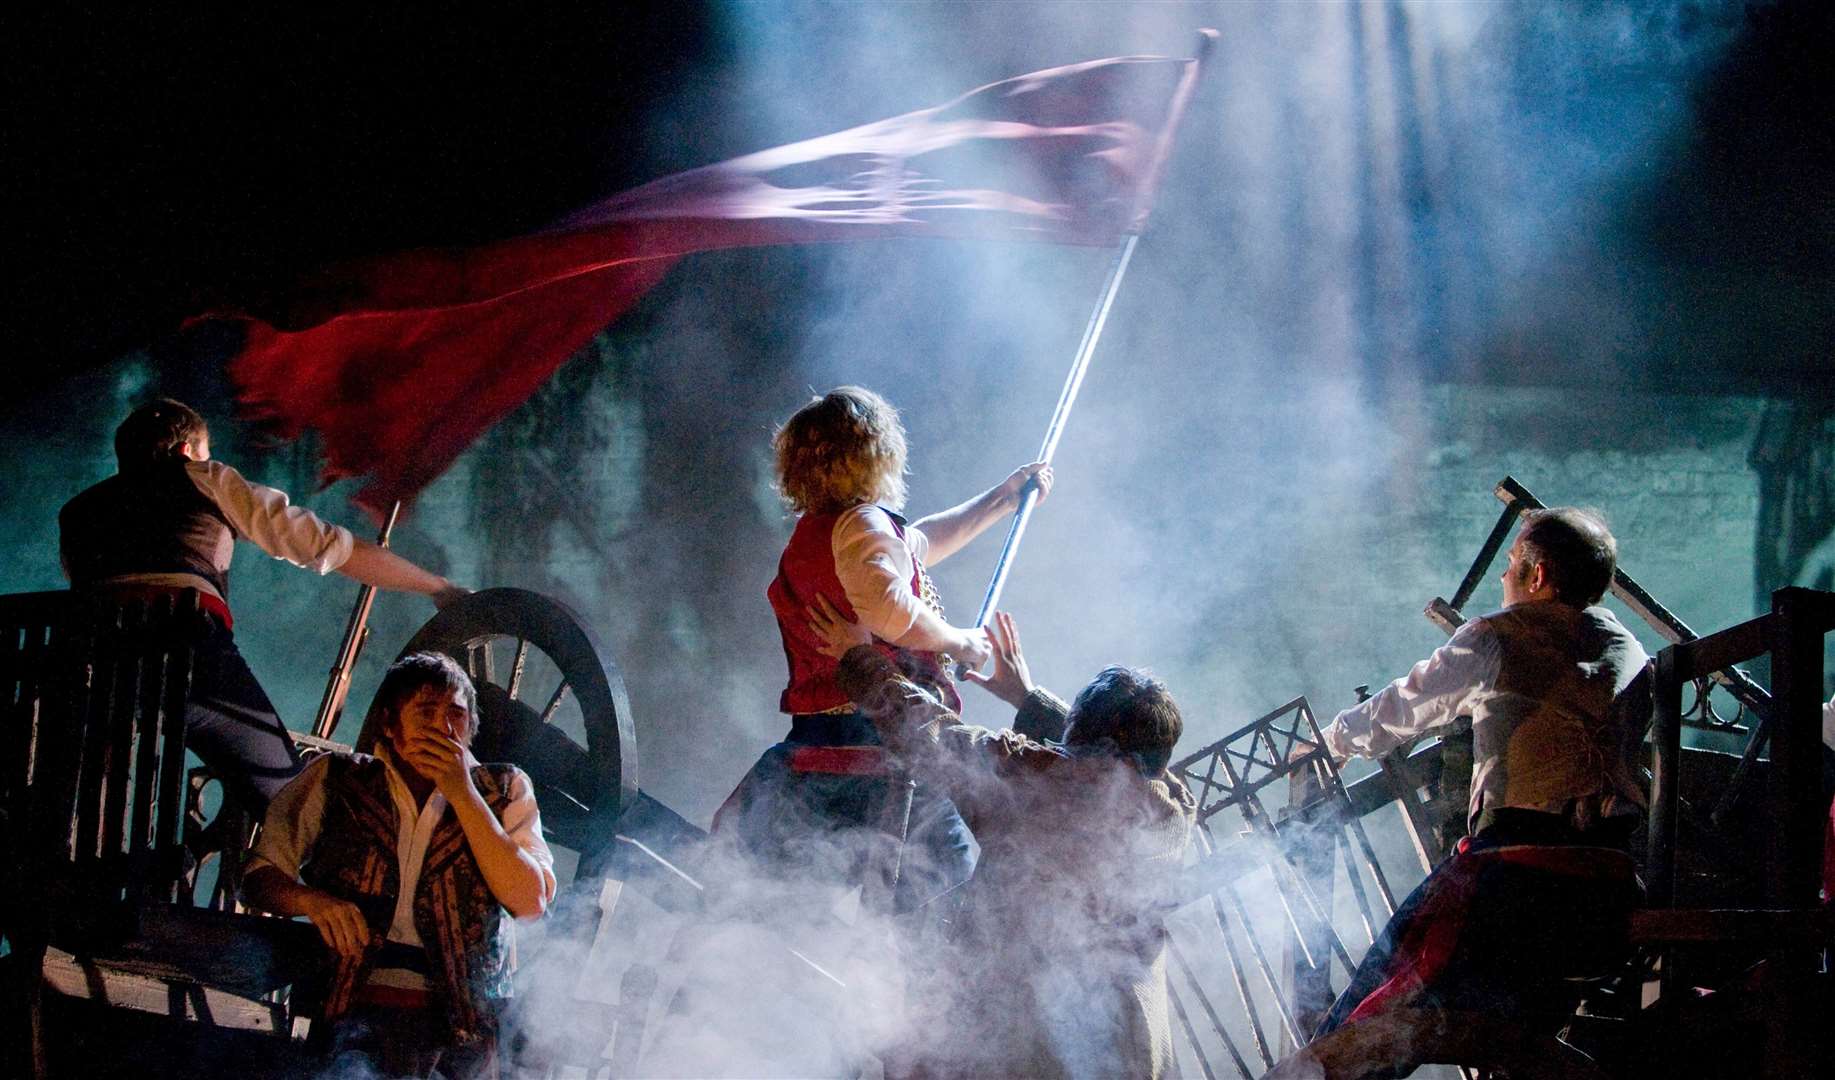 Les Miserables will be coming to the county